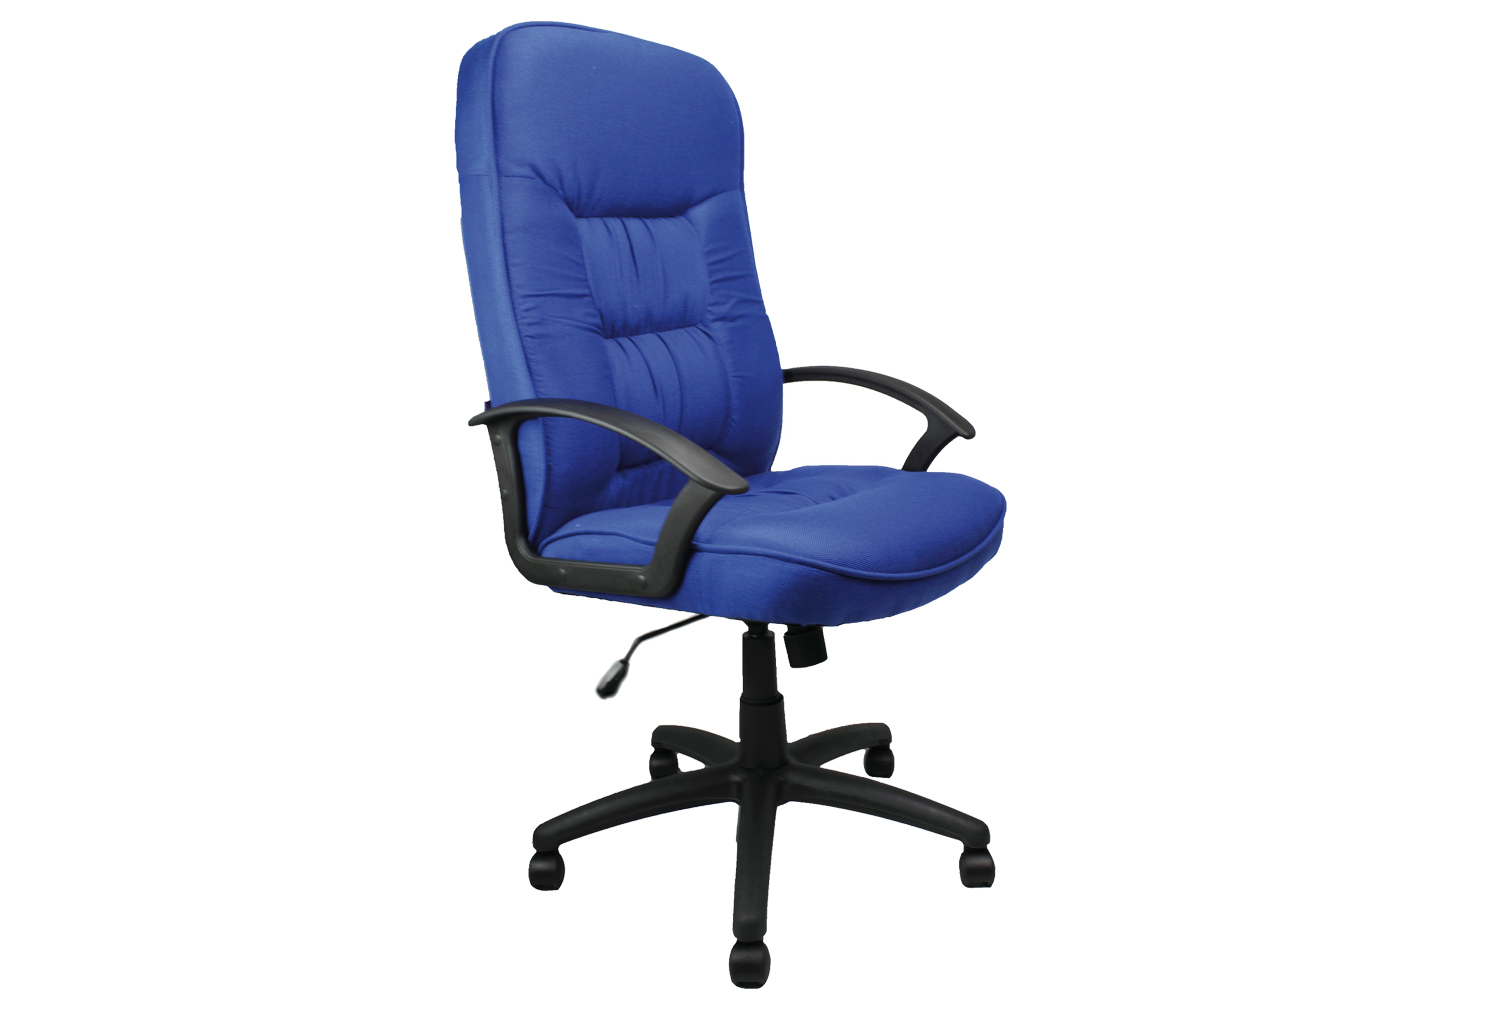 Nero High Back Fabric Executive Office Chair (Blue), Fully Installed